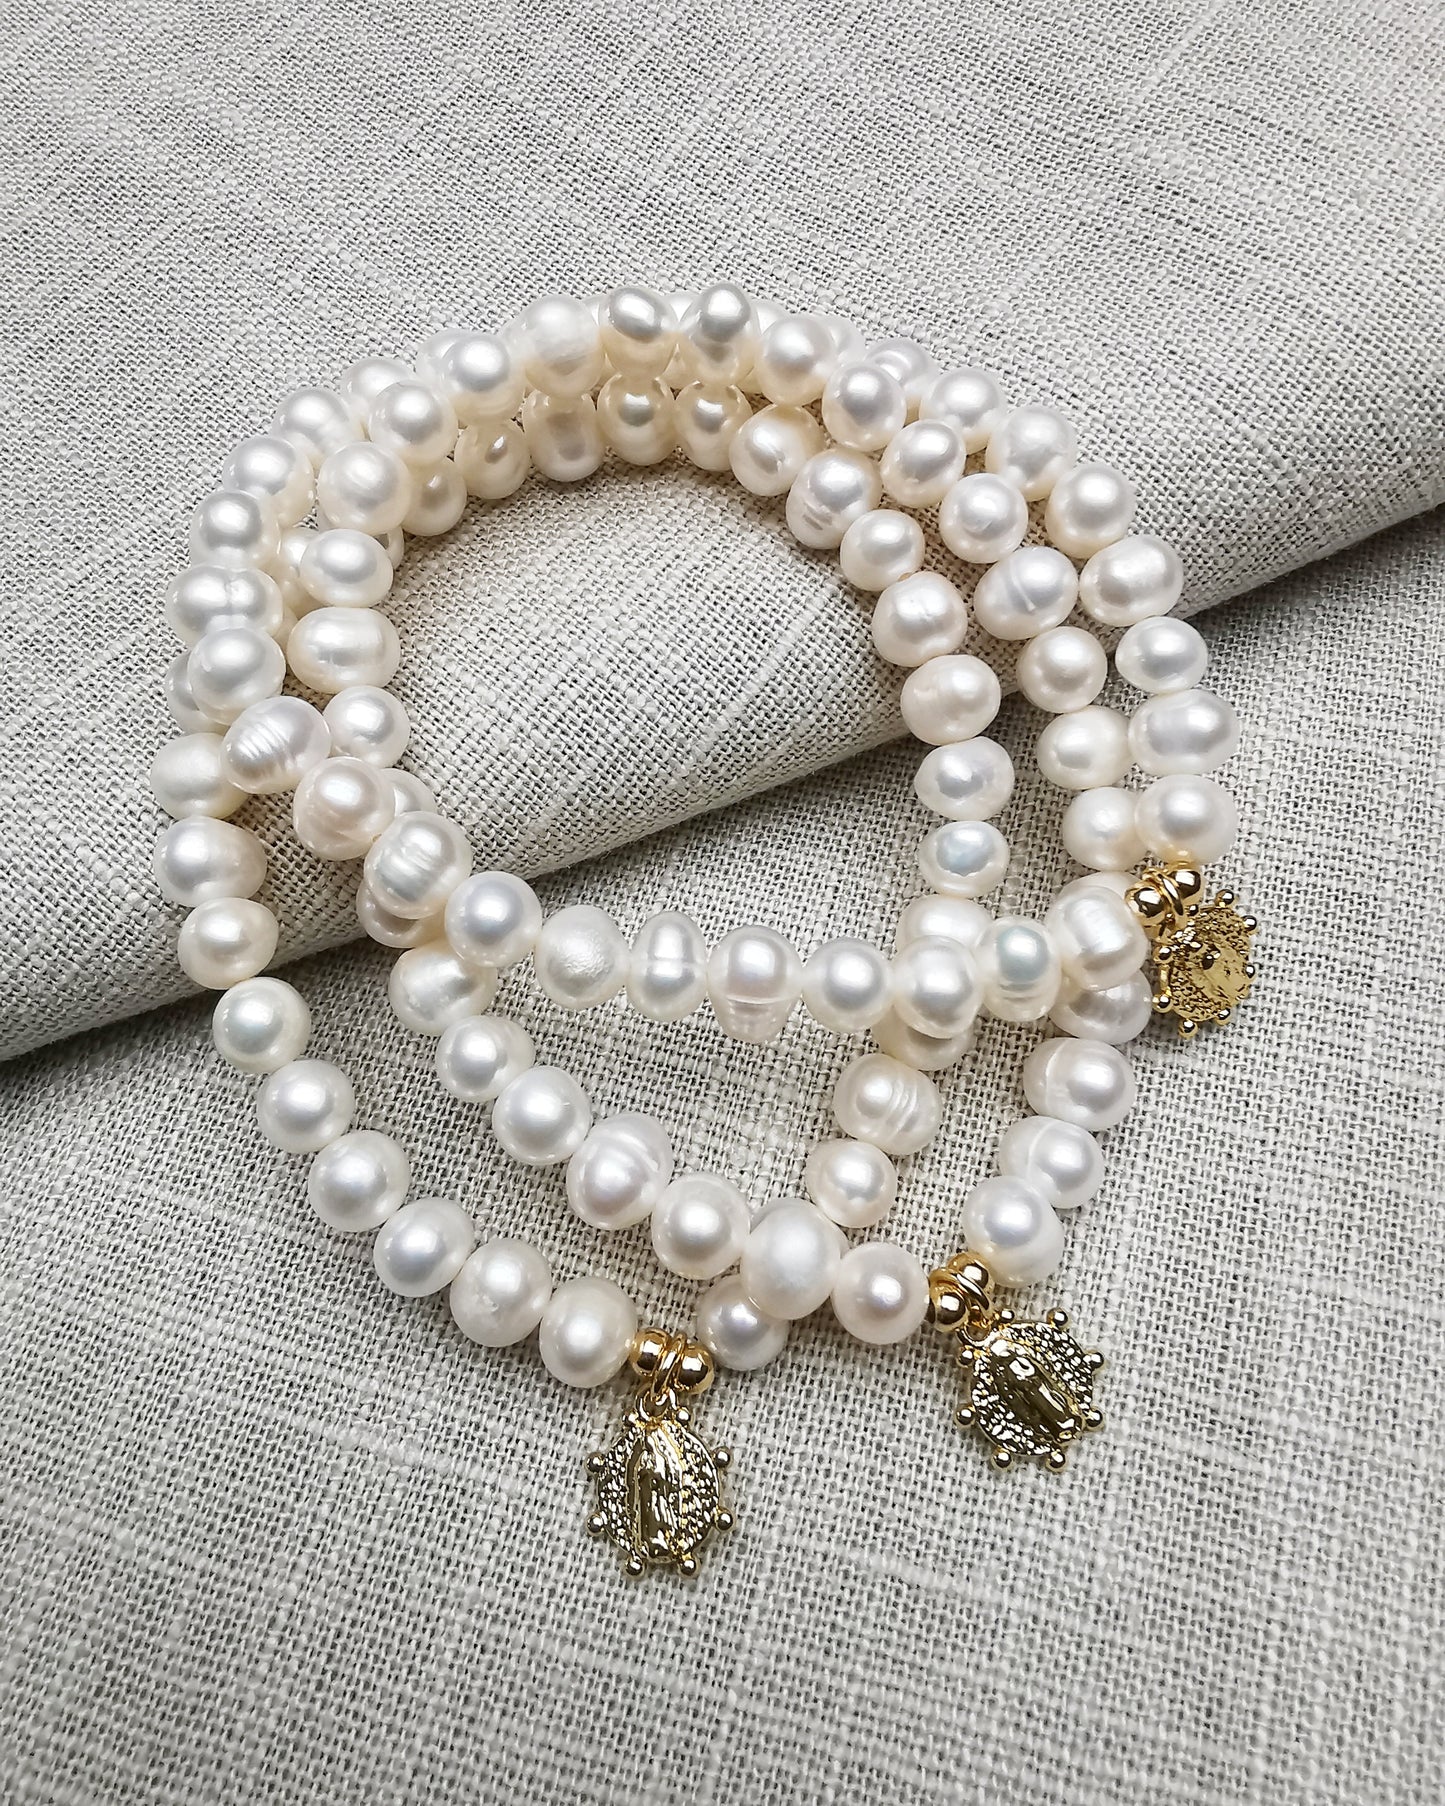 Freshwater Pearl Bracelet with Holy Virgin Mary Dainty Medallion